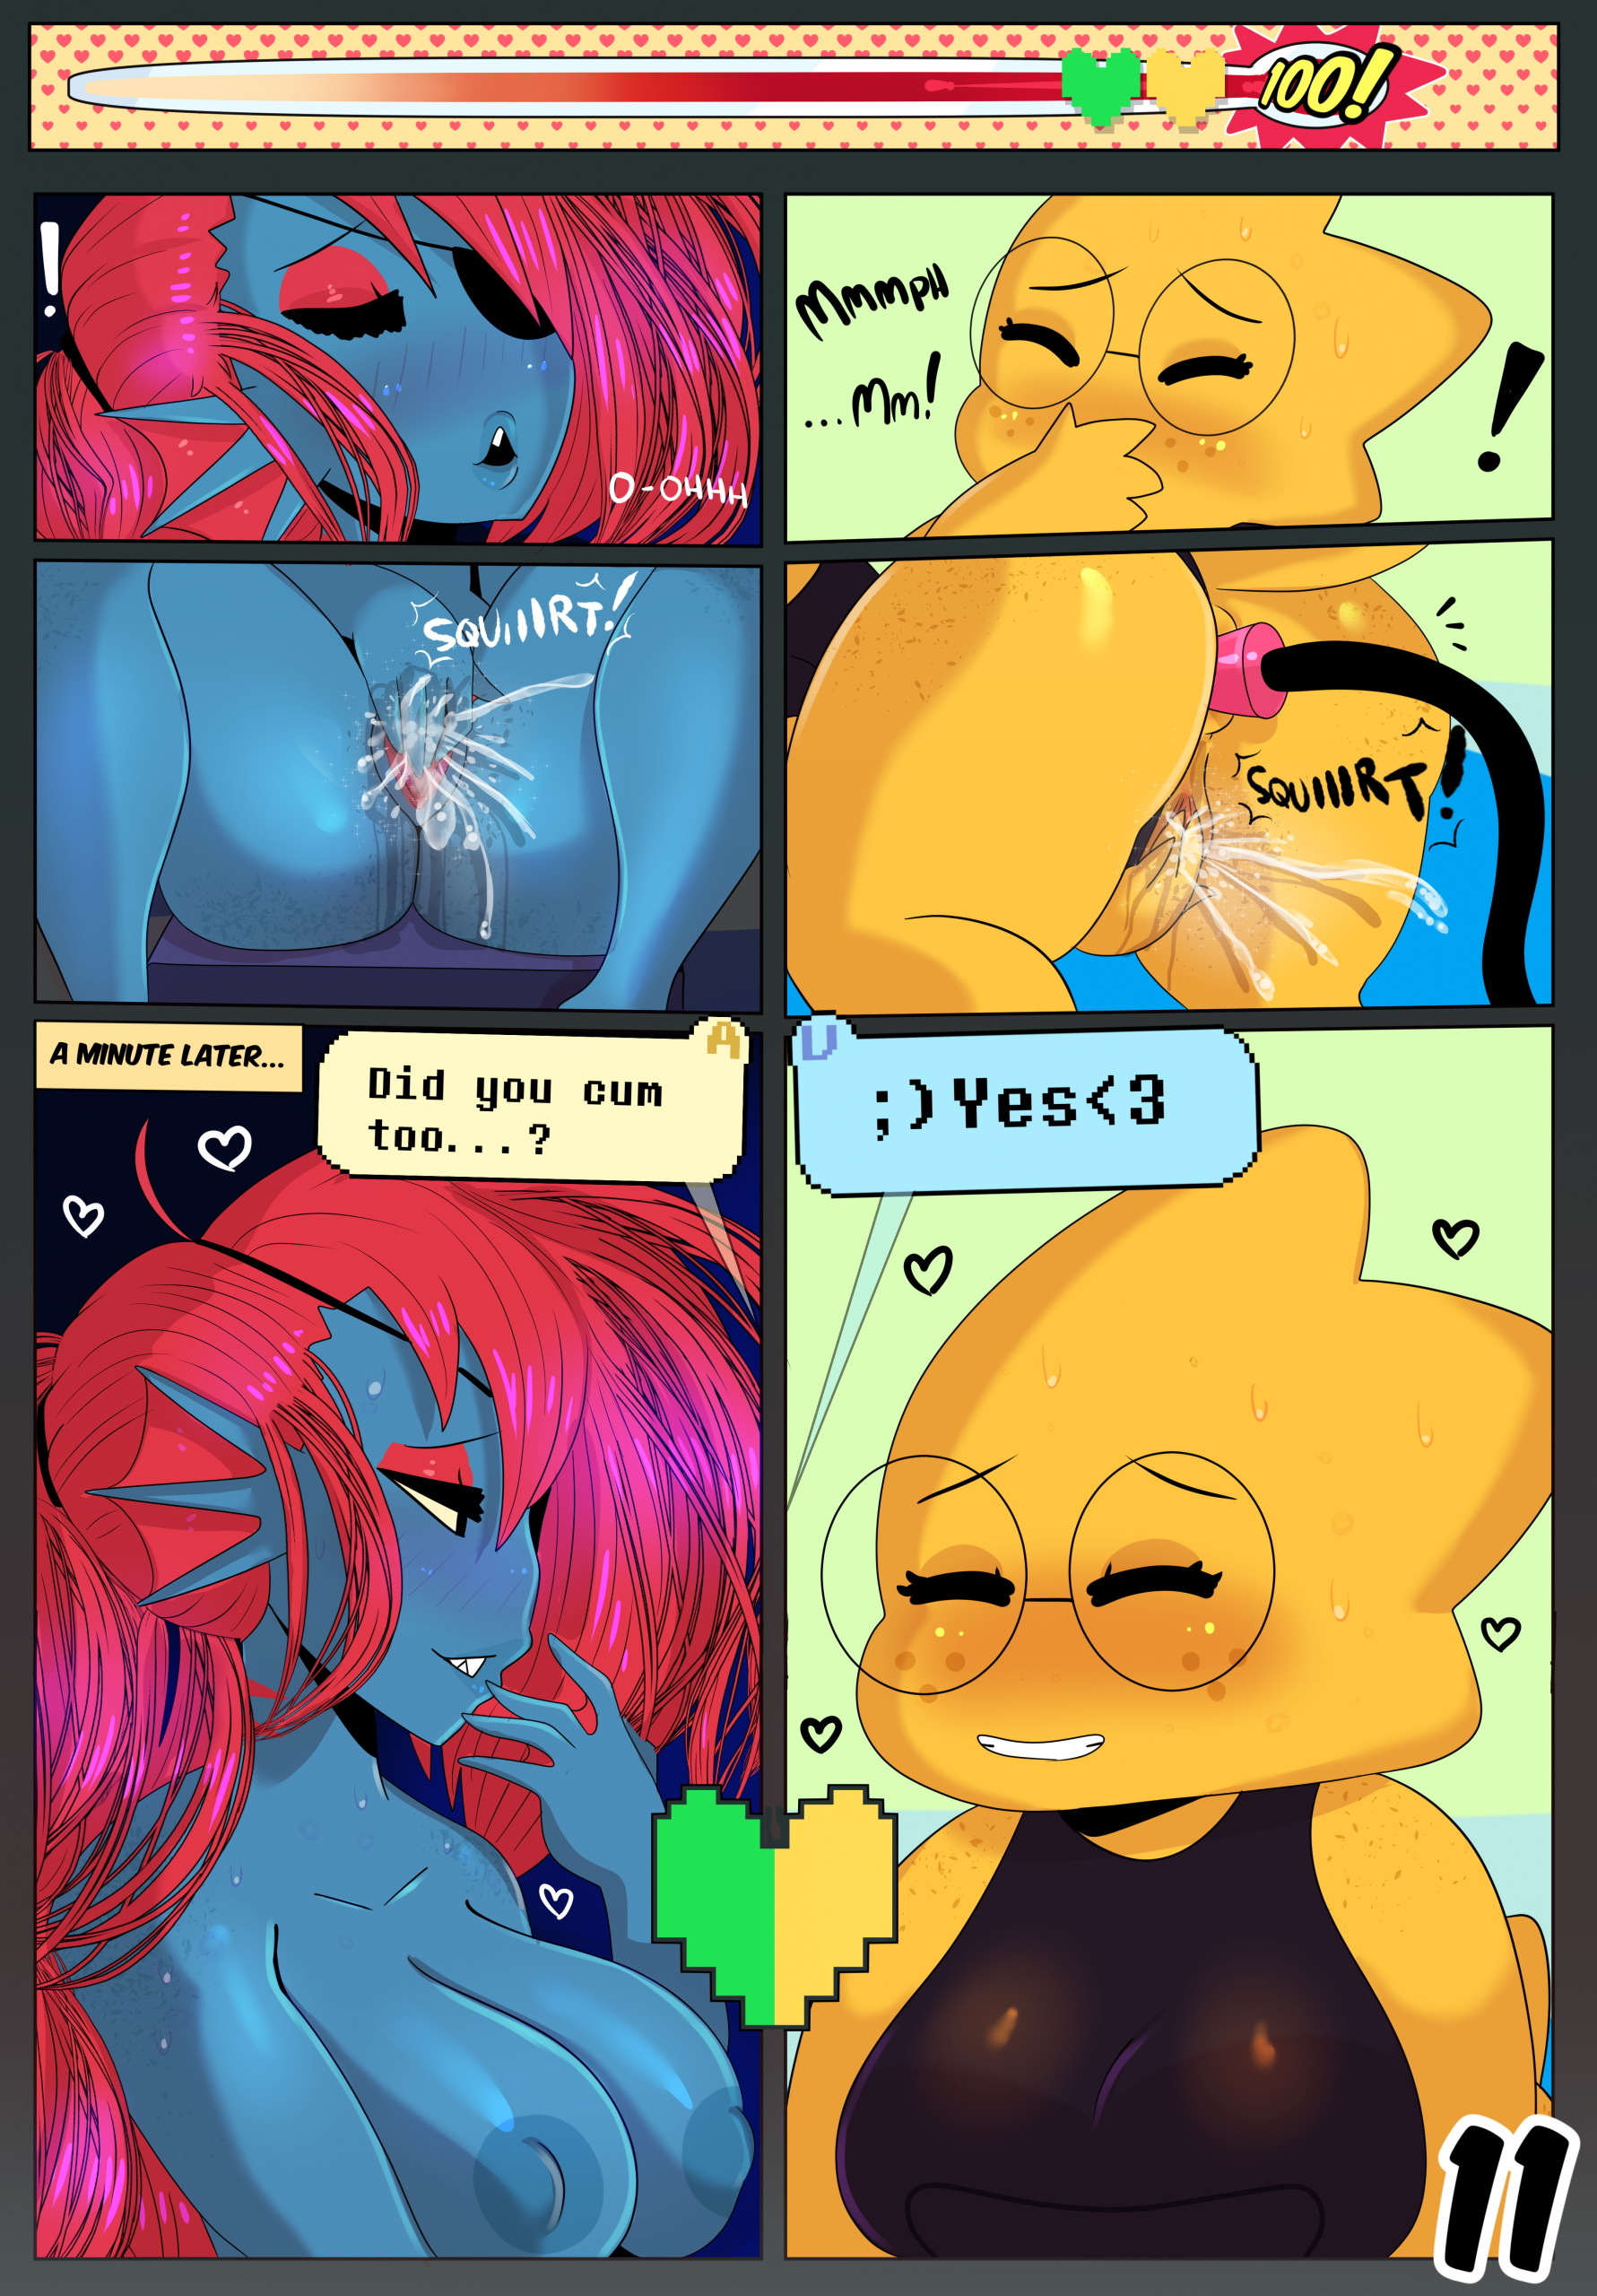 Short Distance Relationship - Page 11